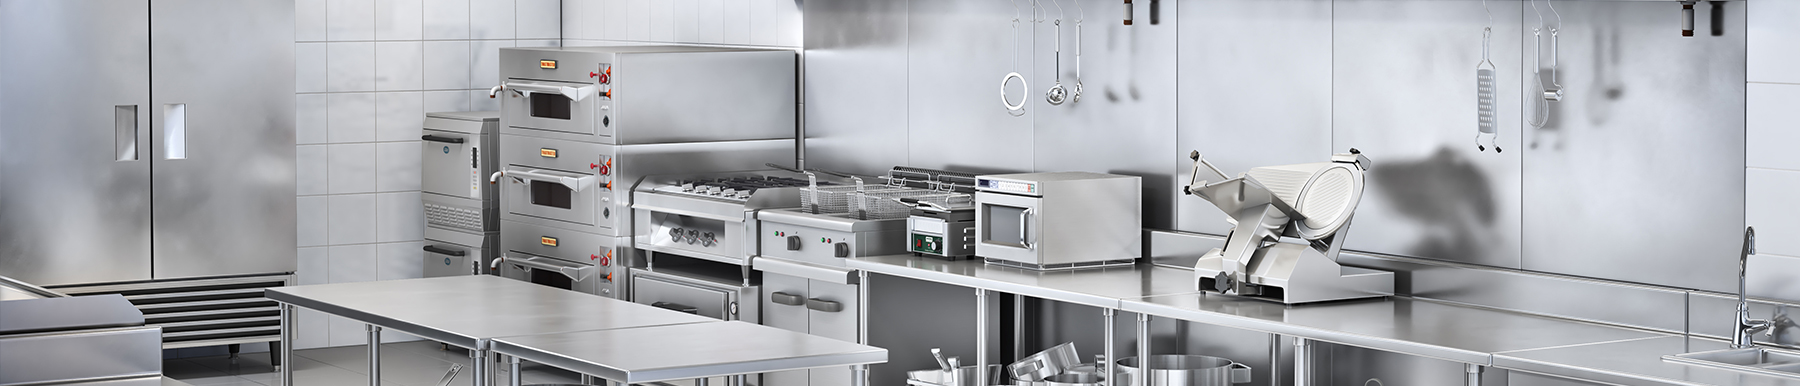 Catering Equipment Suppliers Near Aylesbury Vale | H2 Catering Equipment Catering Equipment